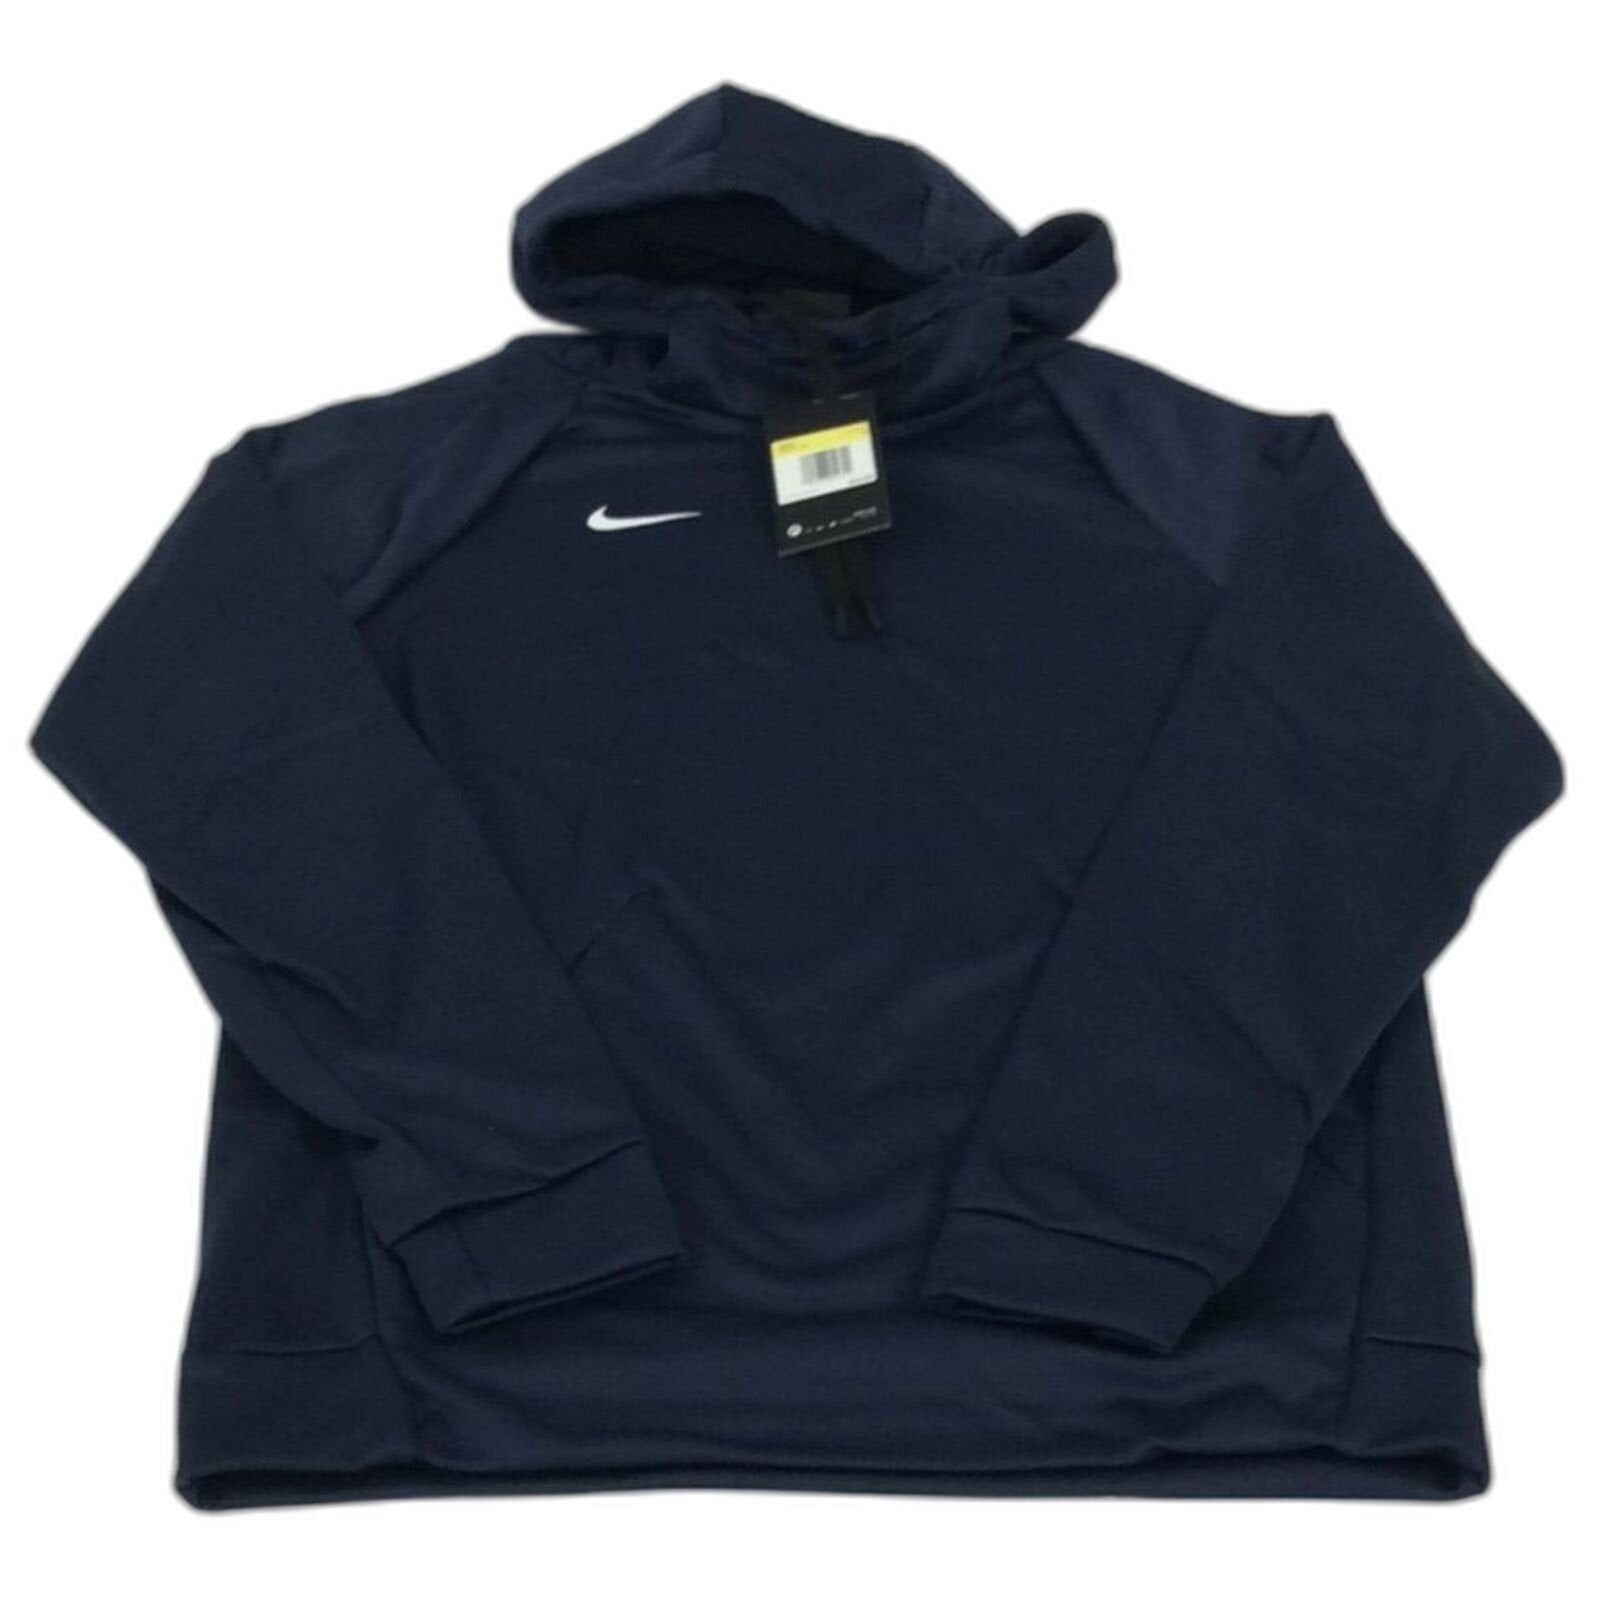 Nike Therma Pullover Hoodie Navy White Mens Size Small S